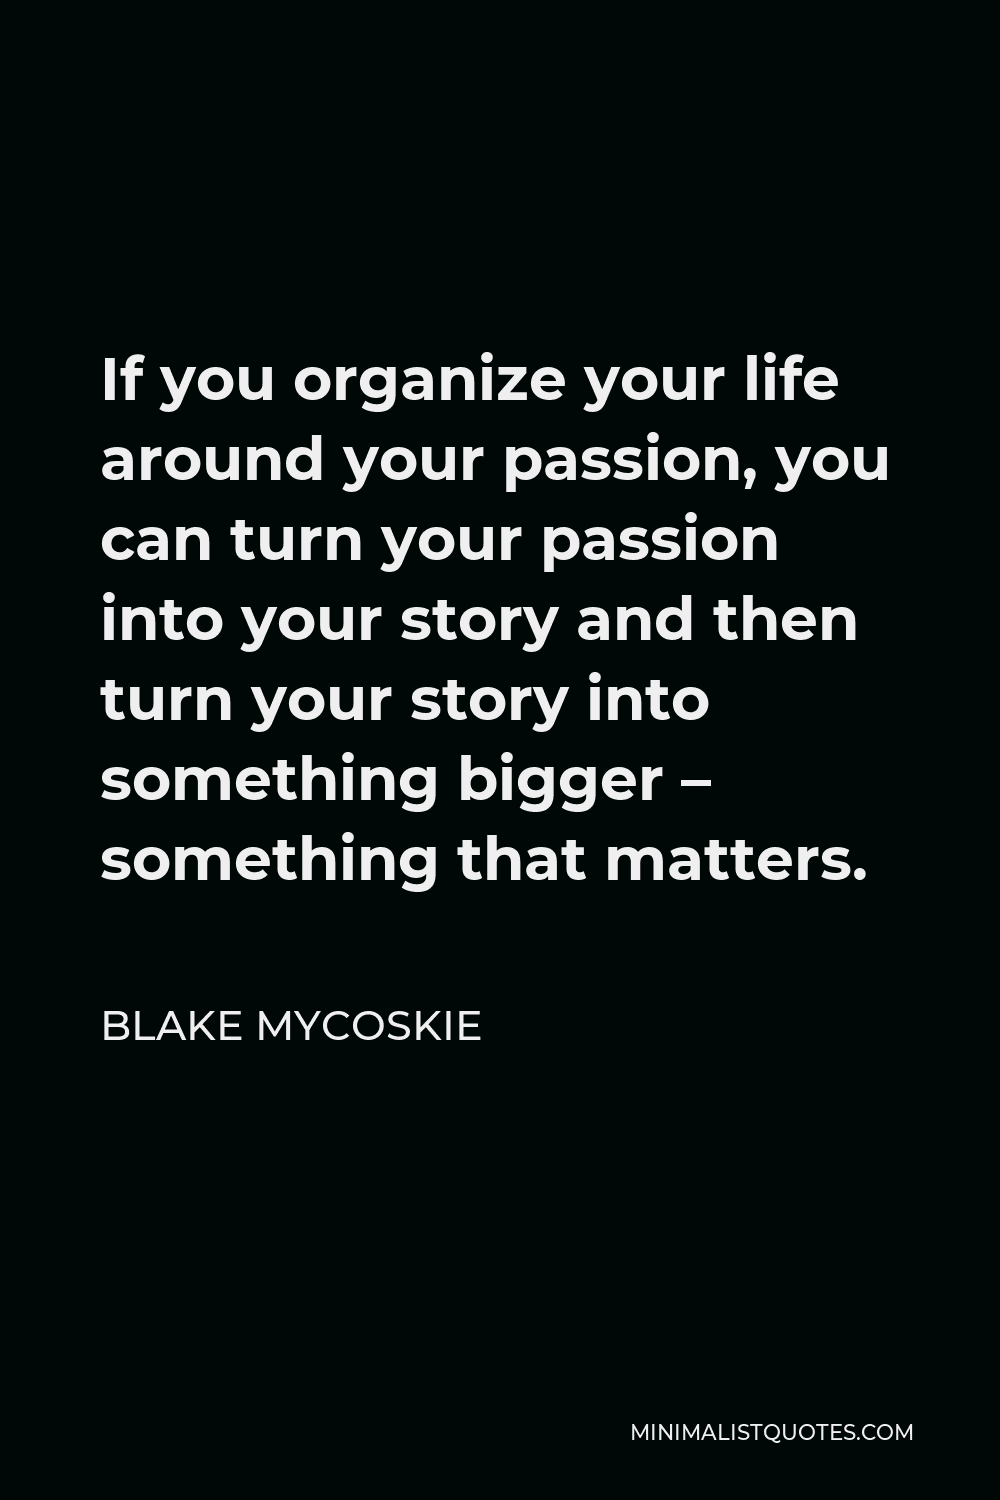 Blake Mycoskie Quote - If you organize your life around your passion, you can turn your passion into your story and then turn your story into something bigger – something that matters.